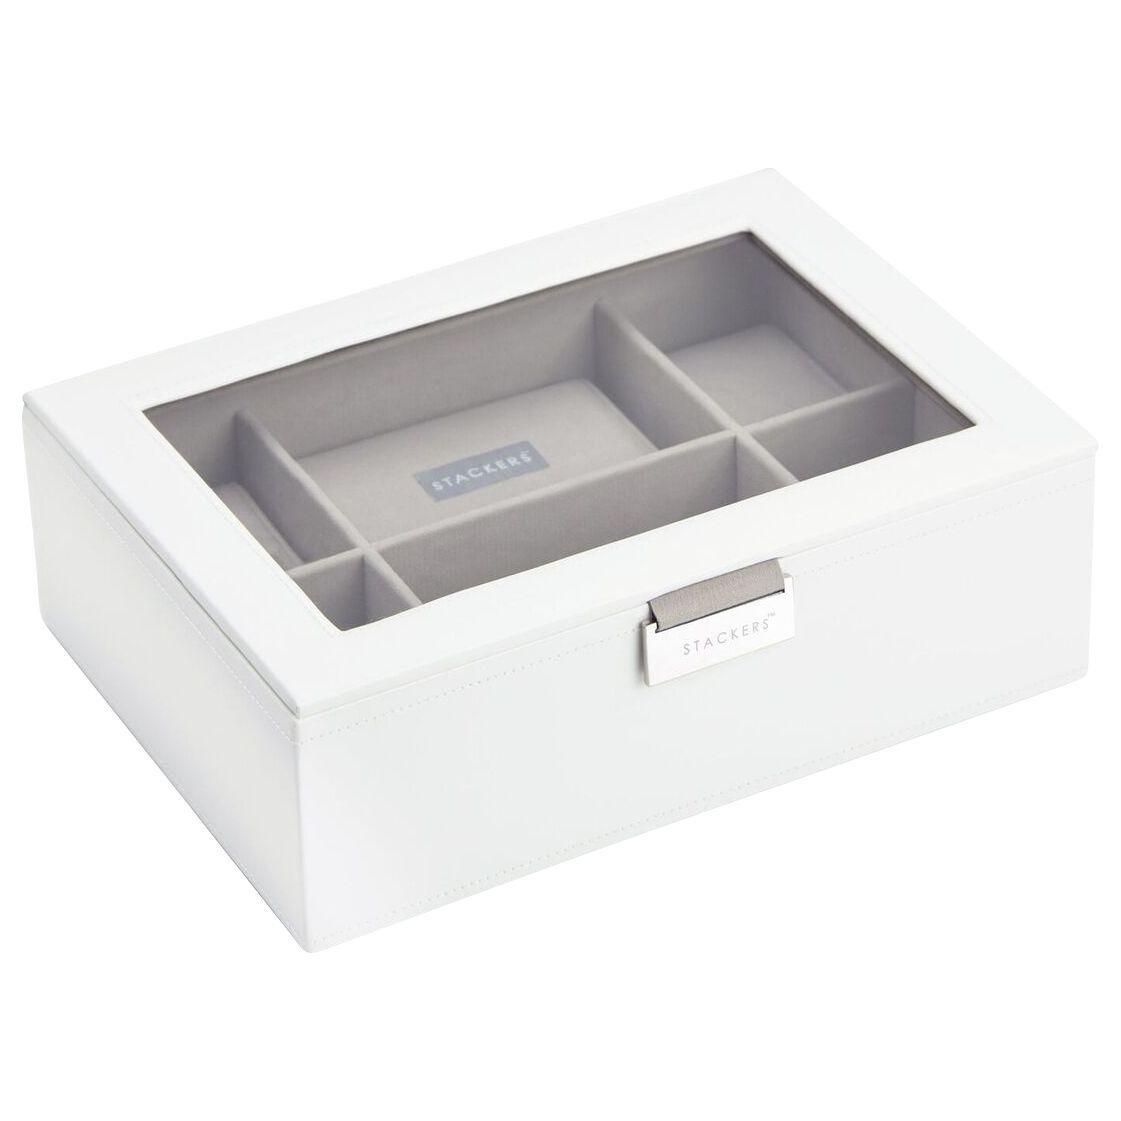 Stackers Watch Box - image 1